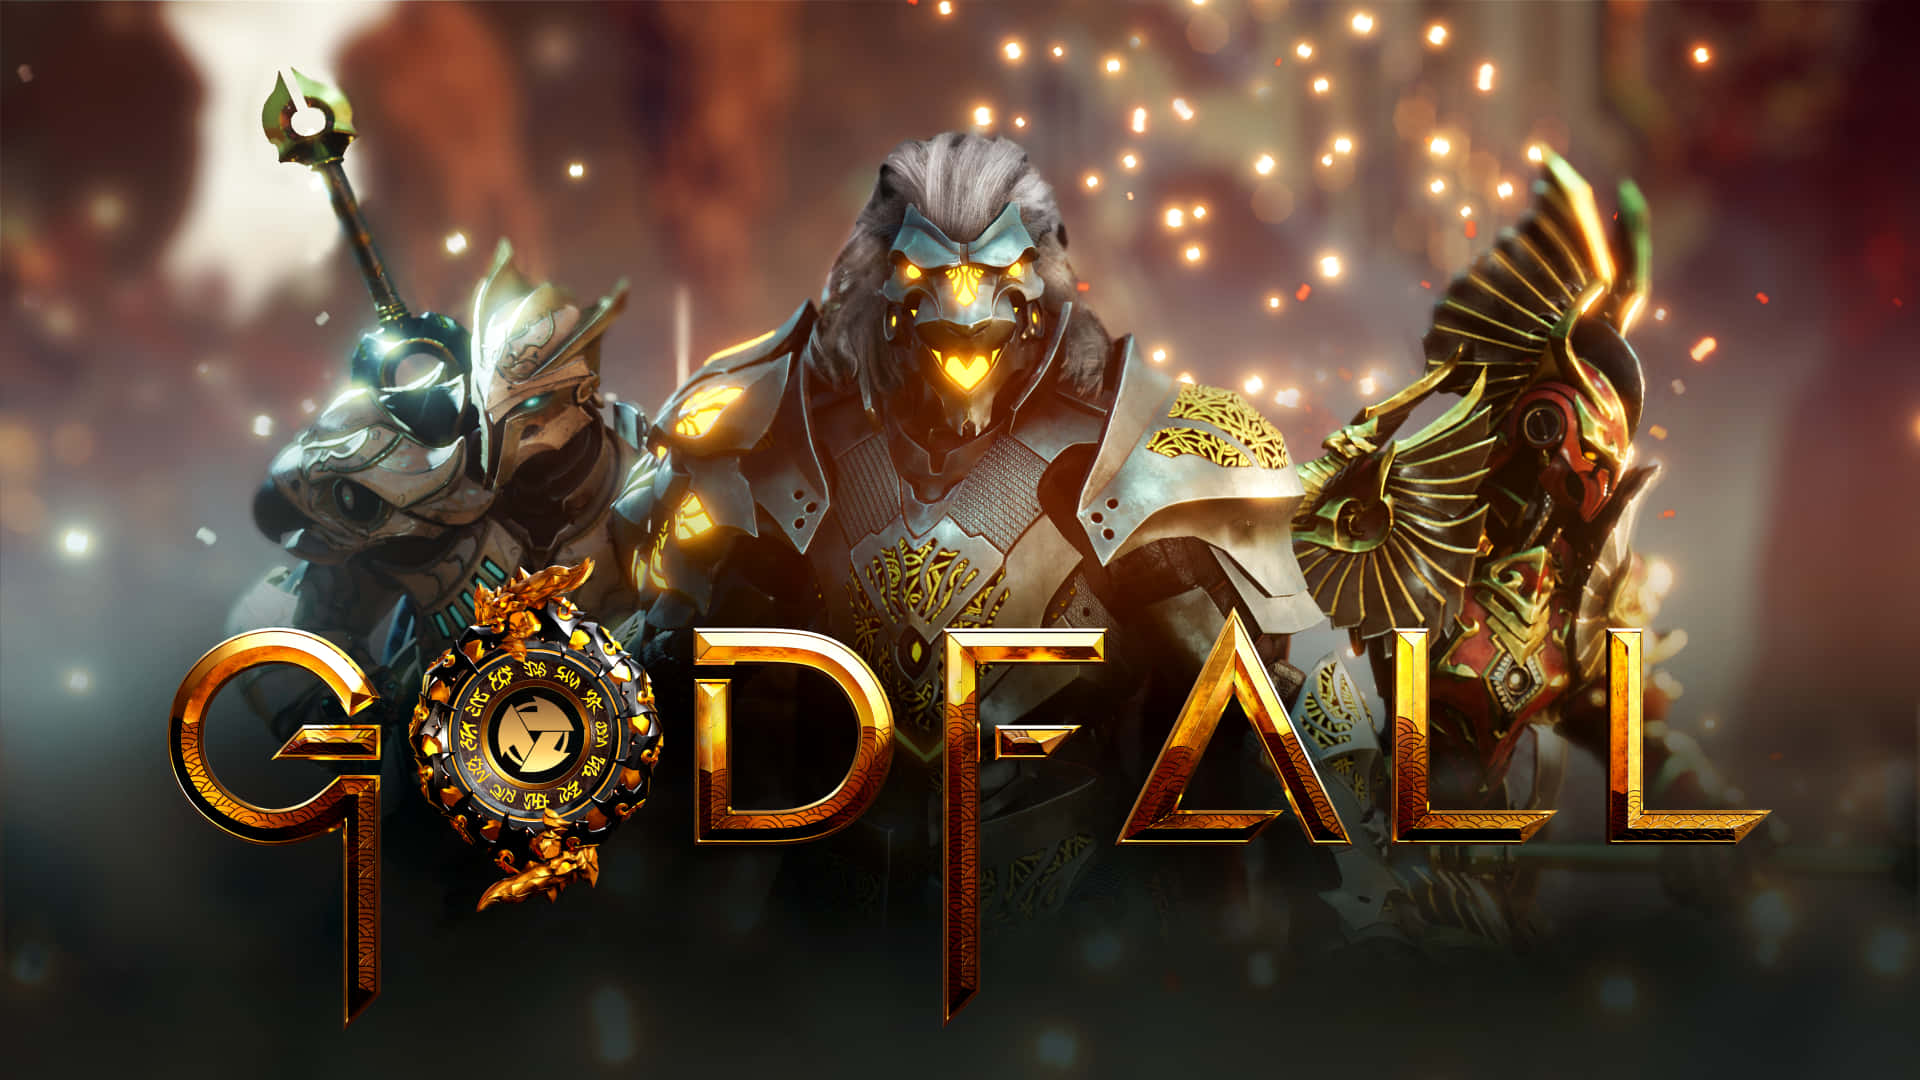 Become a powerful warrior in the fantasy world of Godfall